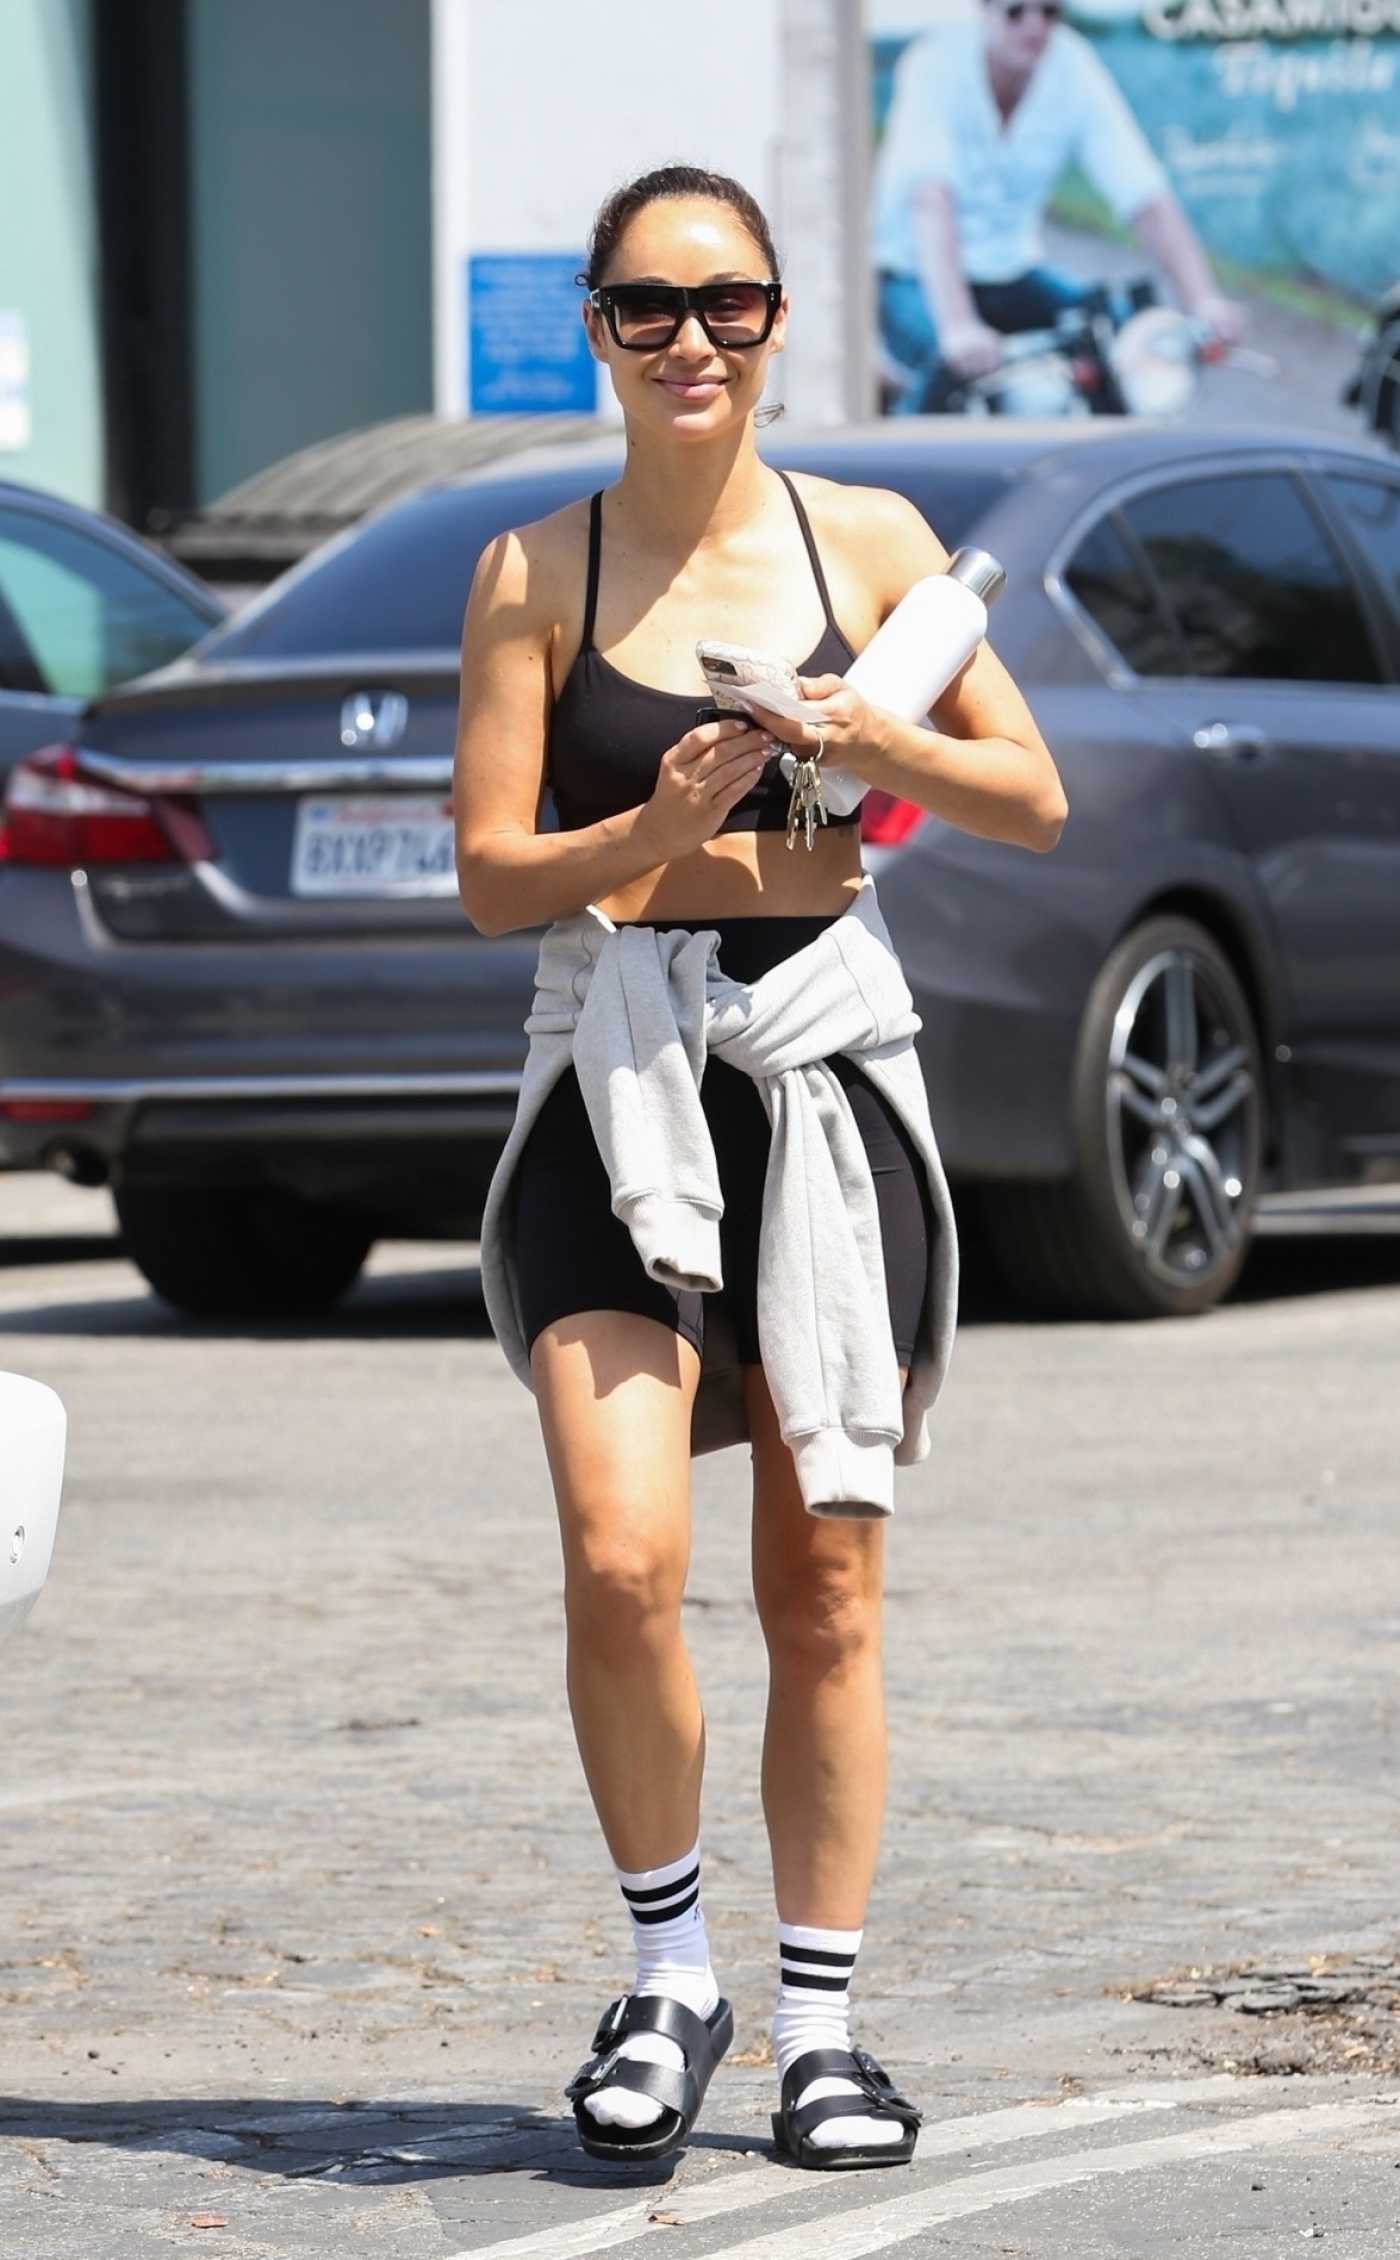 Cara Santana in a Black Sports Bra Leaves the Gym After a Workout in West Hollywood 07/12/2022